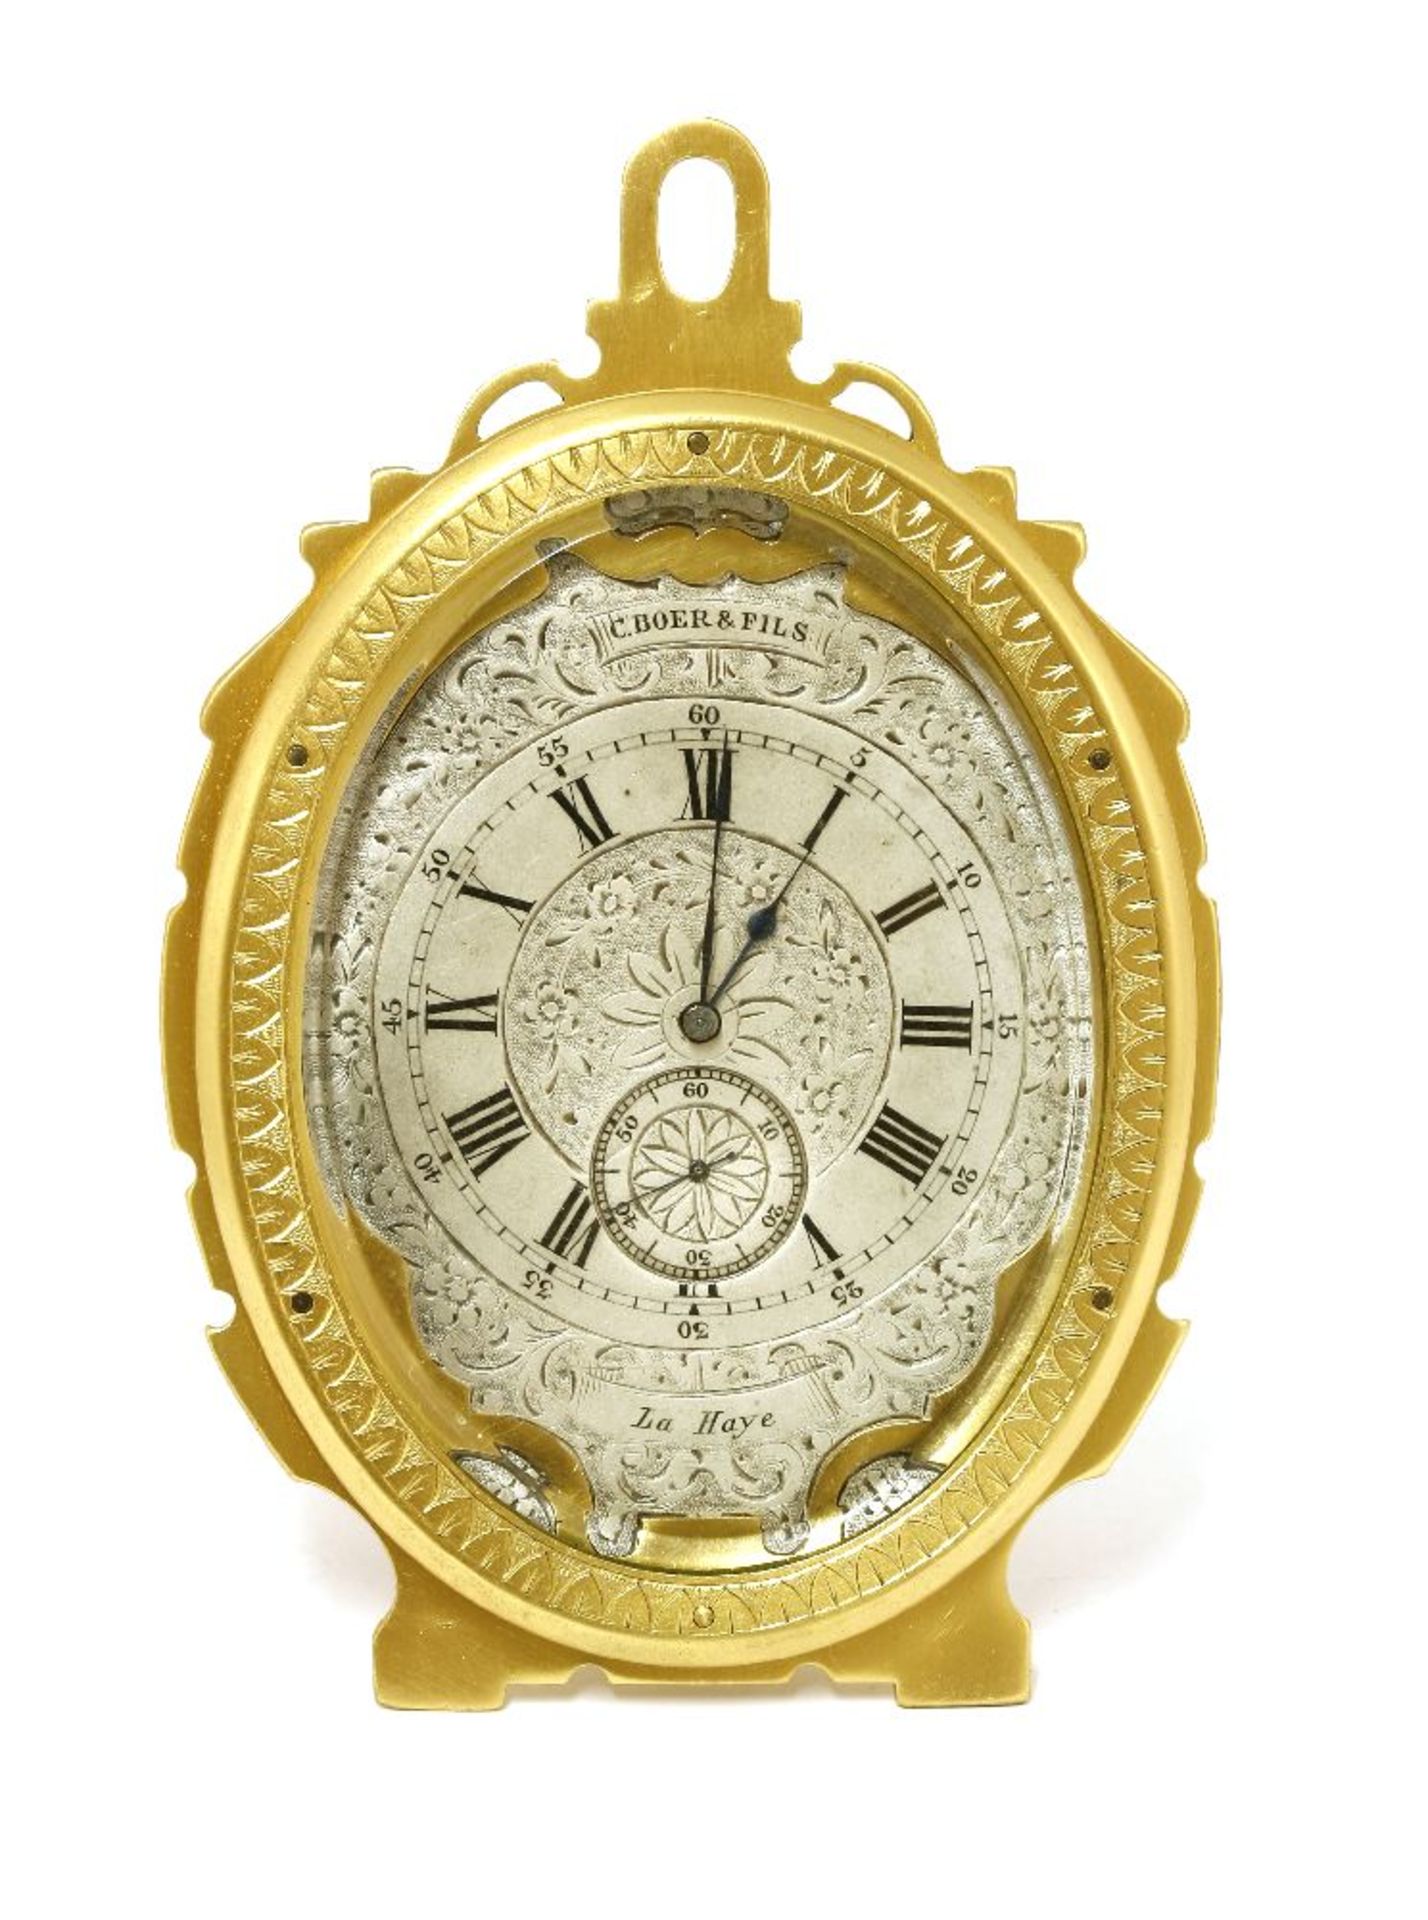 A gilt bronze strut clock,19th century, in the manner of Thomas Cole, the oval dial with a seconds